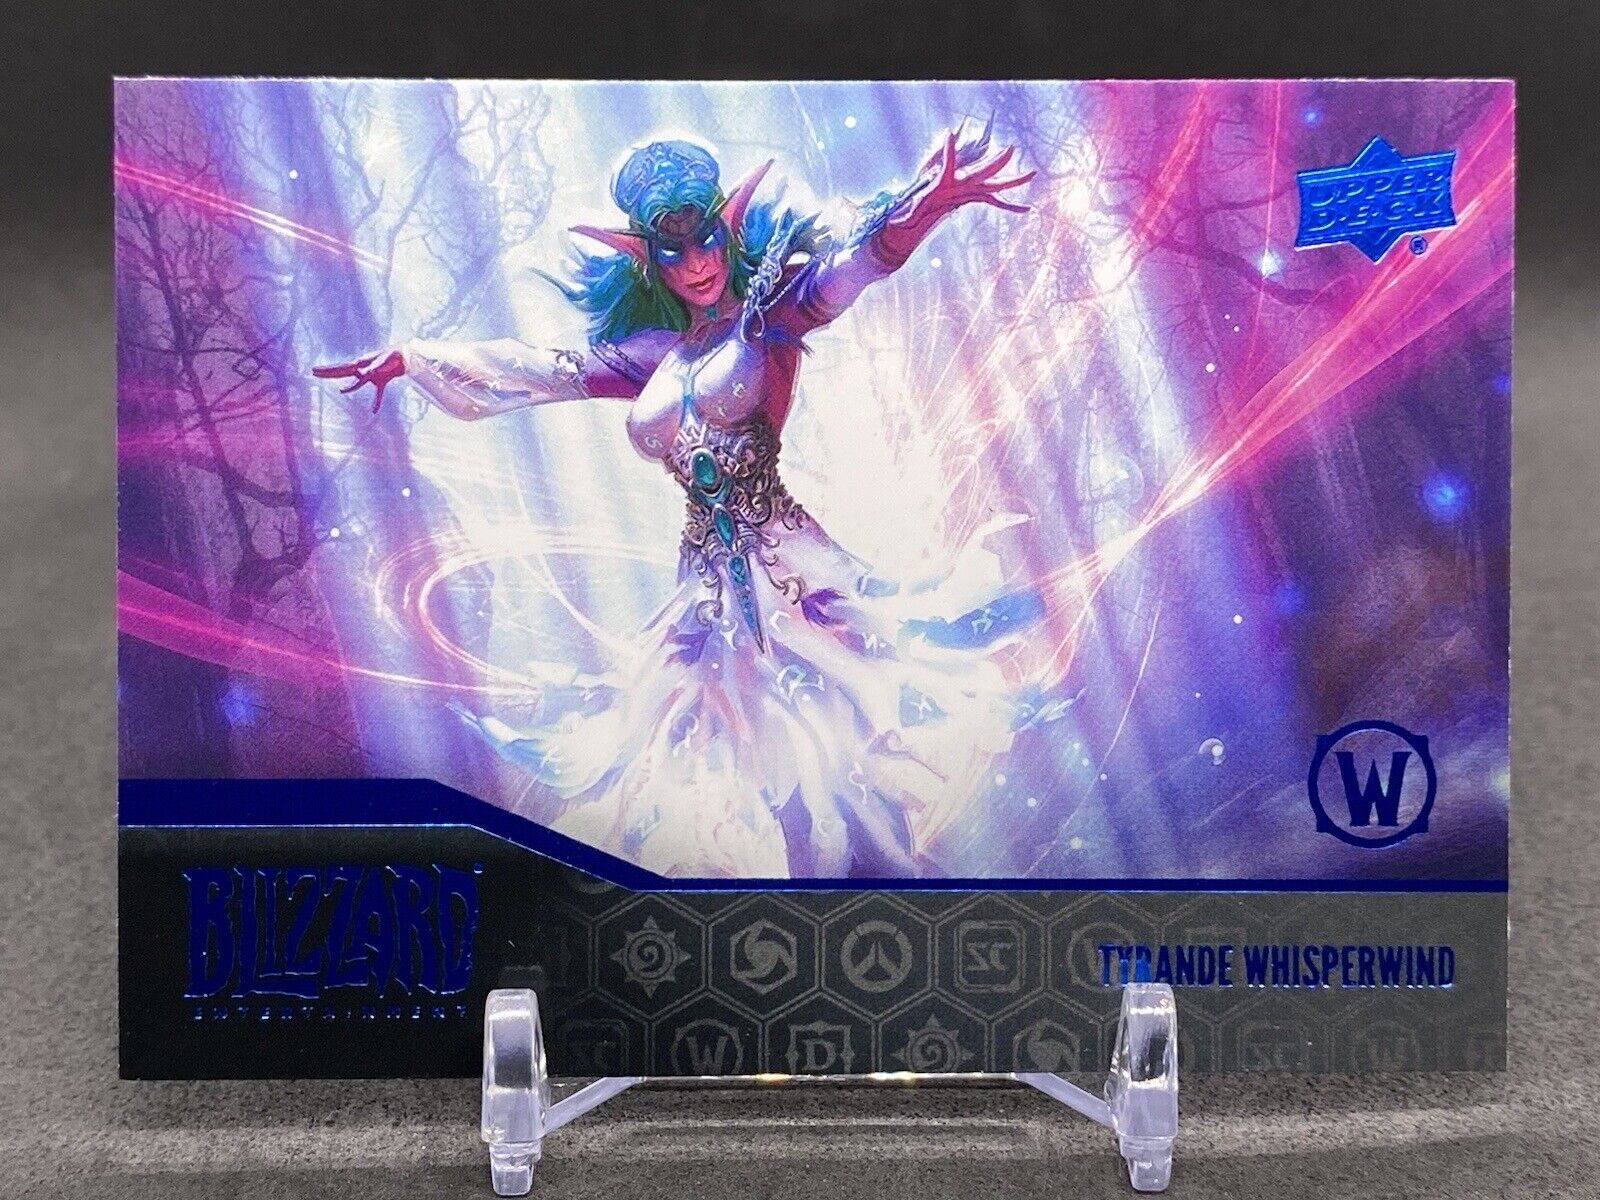 Upper Deck Blizzard Legacy Collection Tyrande Whisperwind Rare Foil #94 WoW